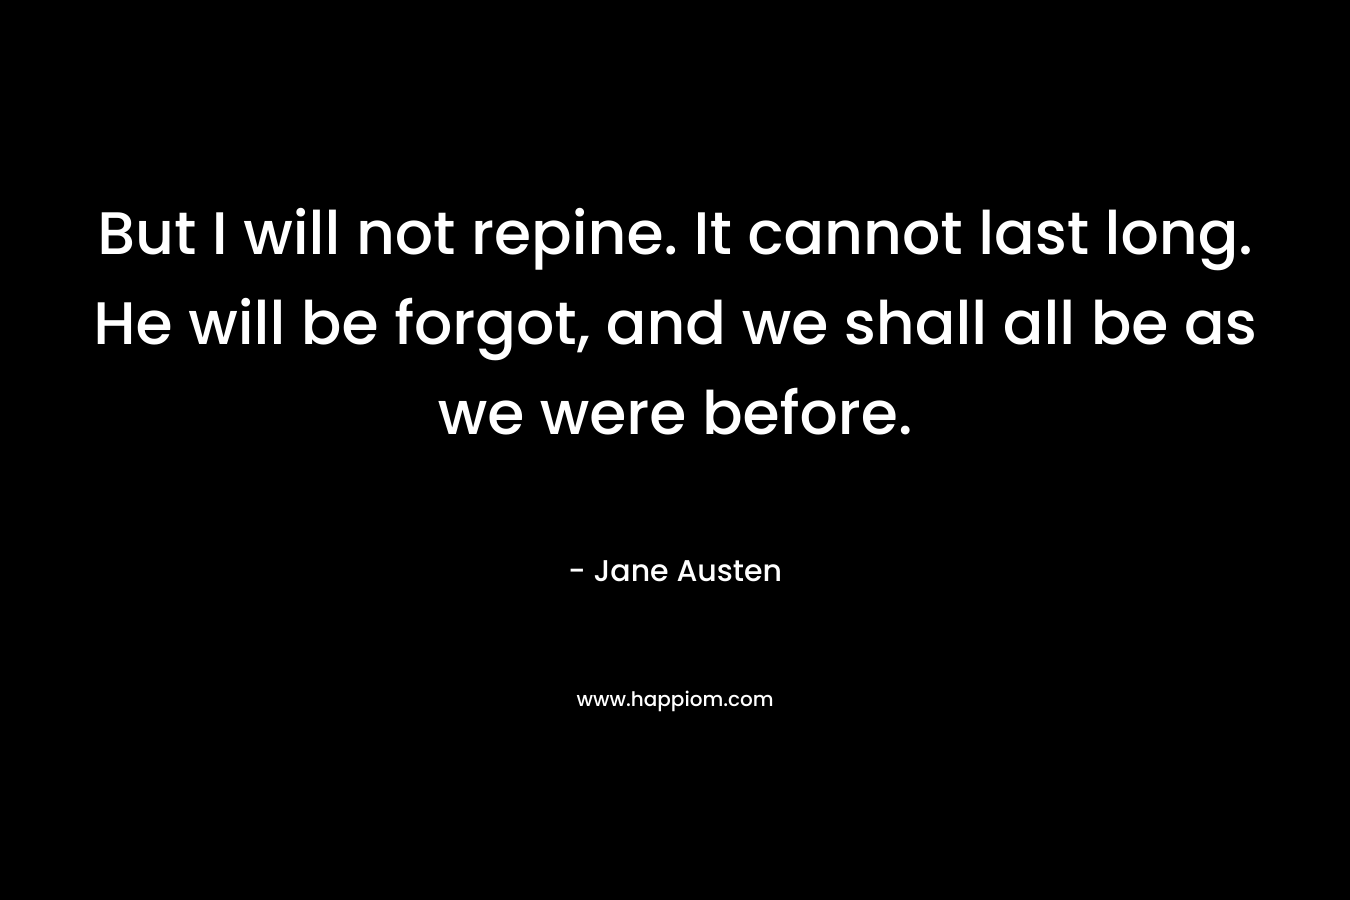 But I will not repine. It cannot last long. He will be forgot, and we shall all be as we were before. – Jane Austen